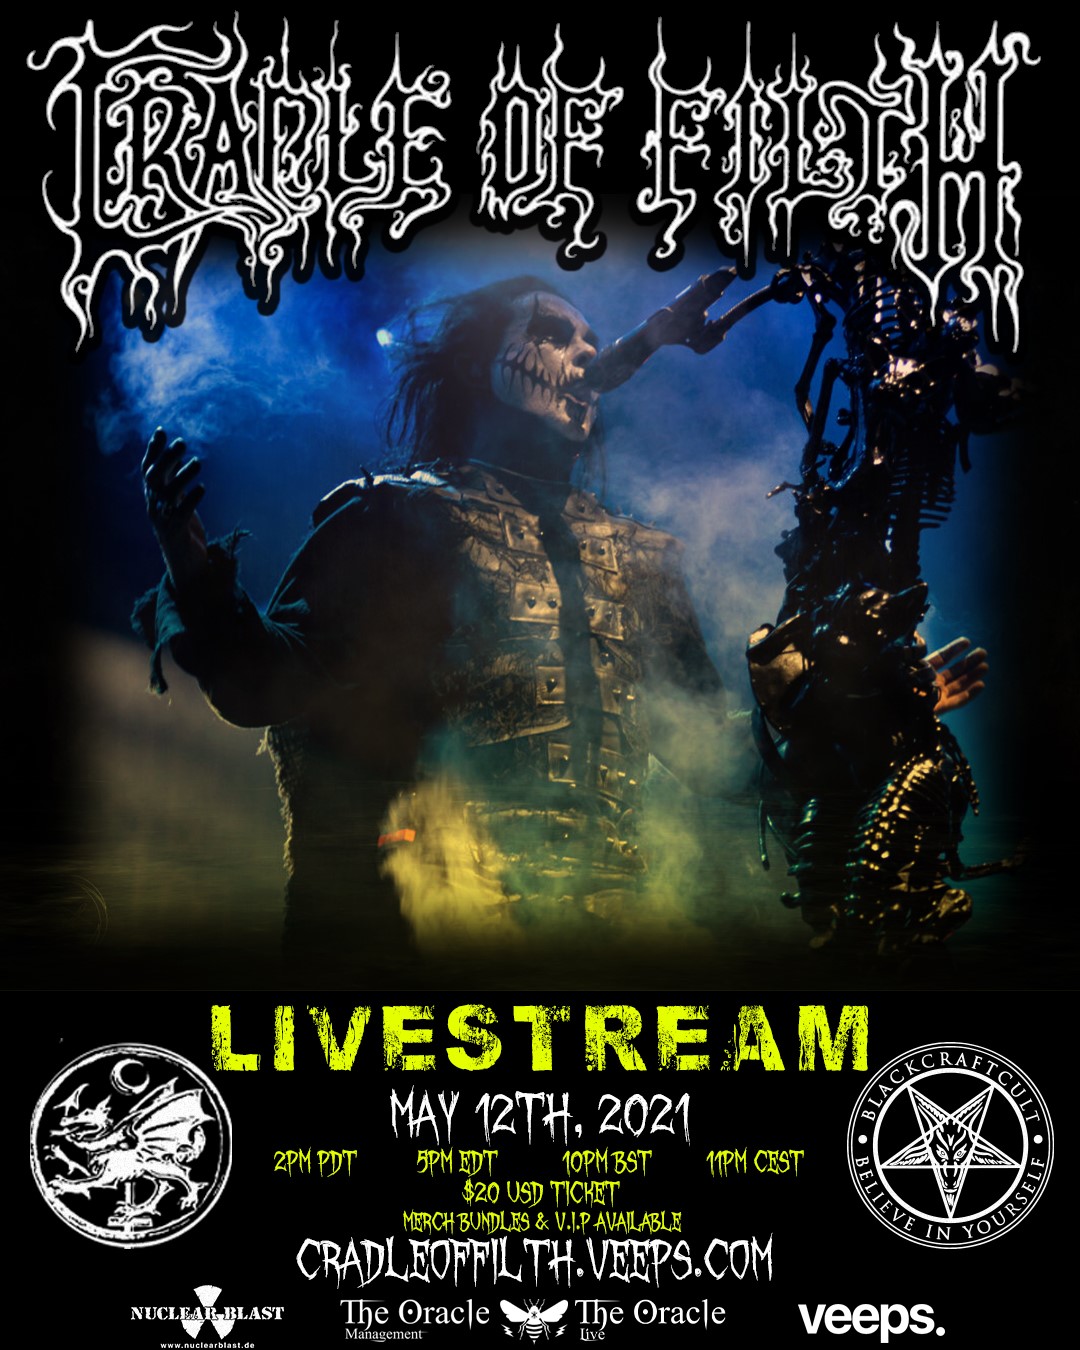 CRADLE OF FILTH Postpone Live Stream Concert to May 12th